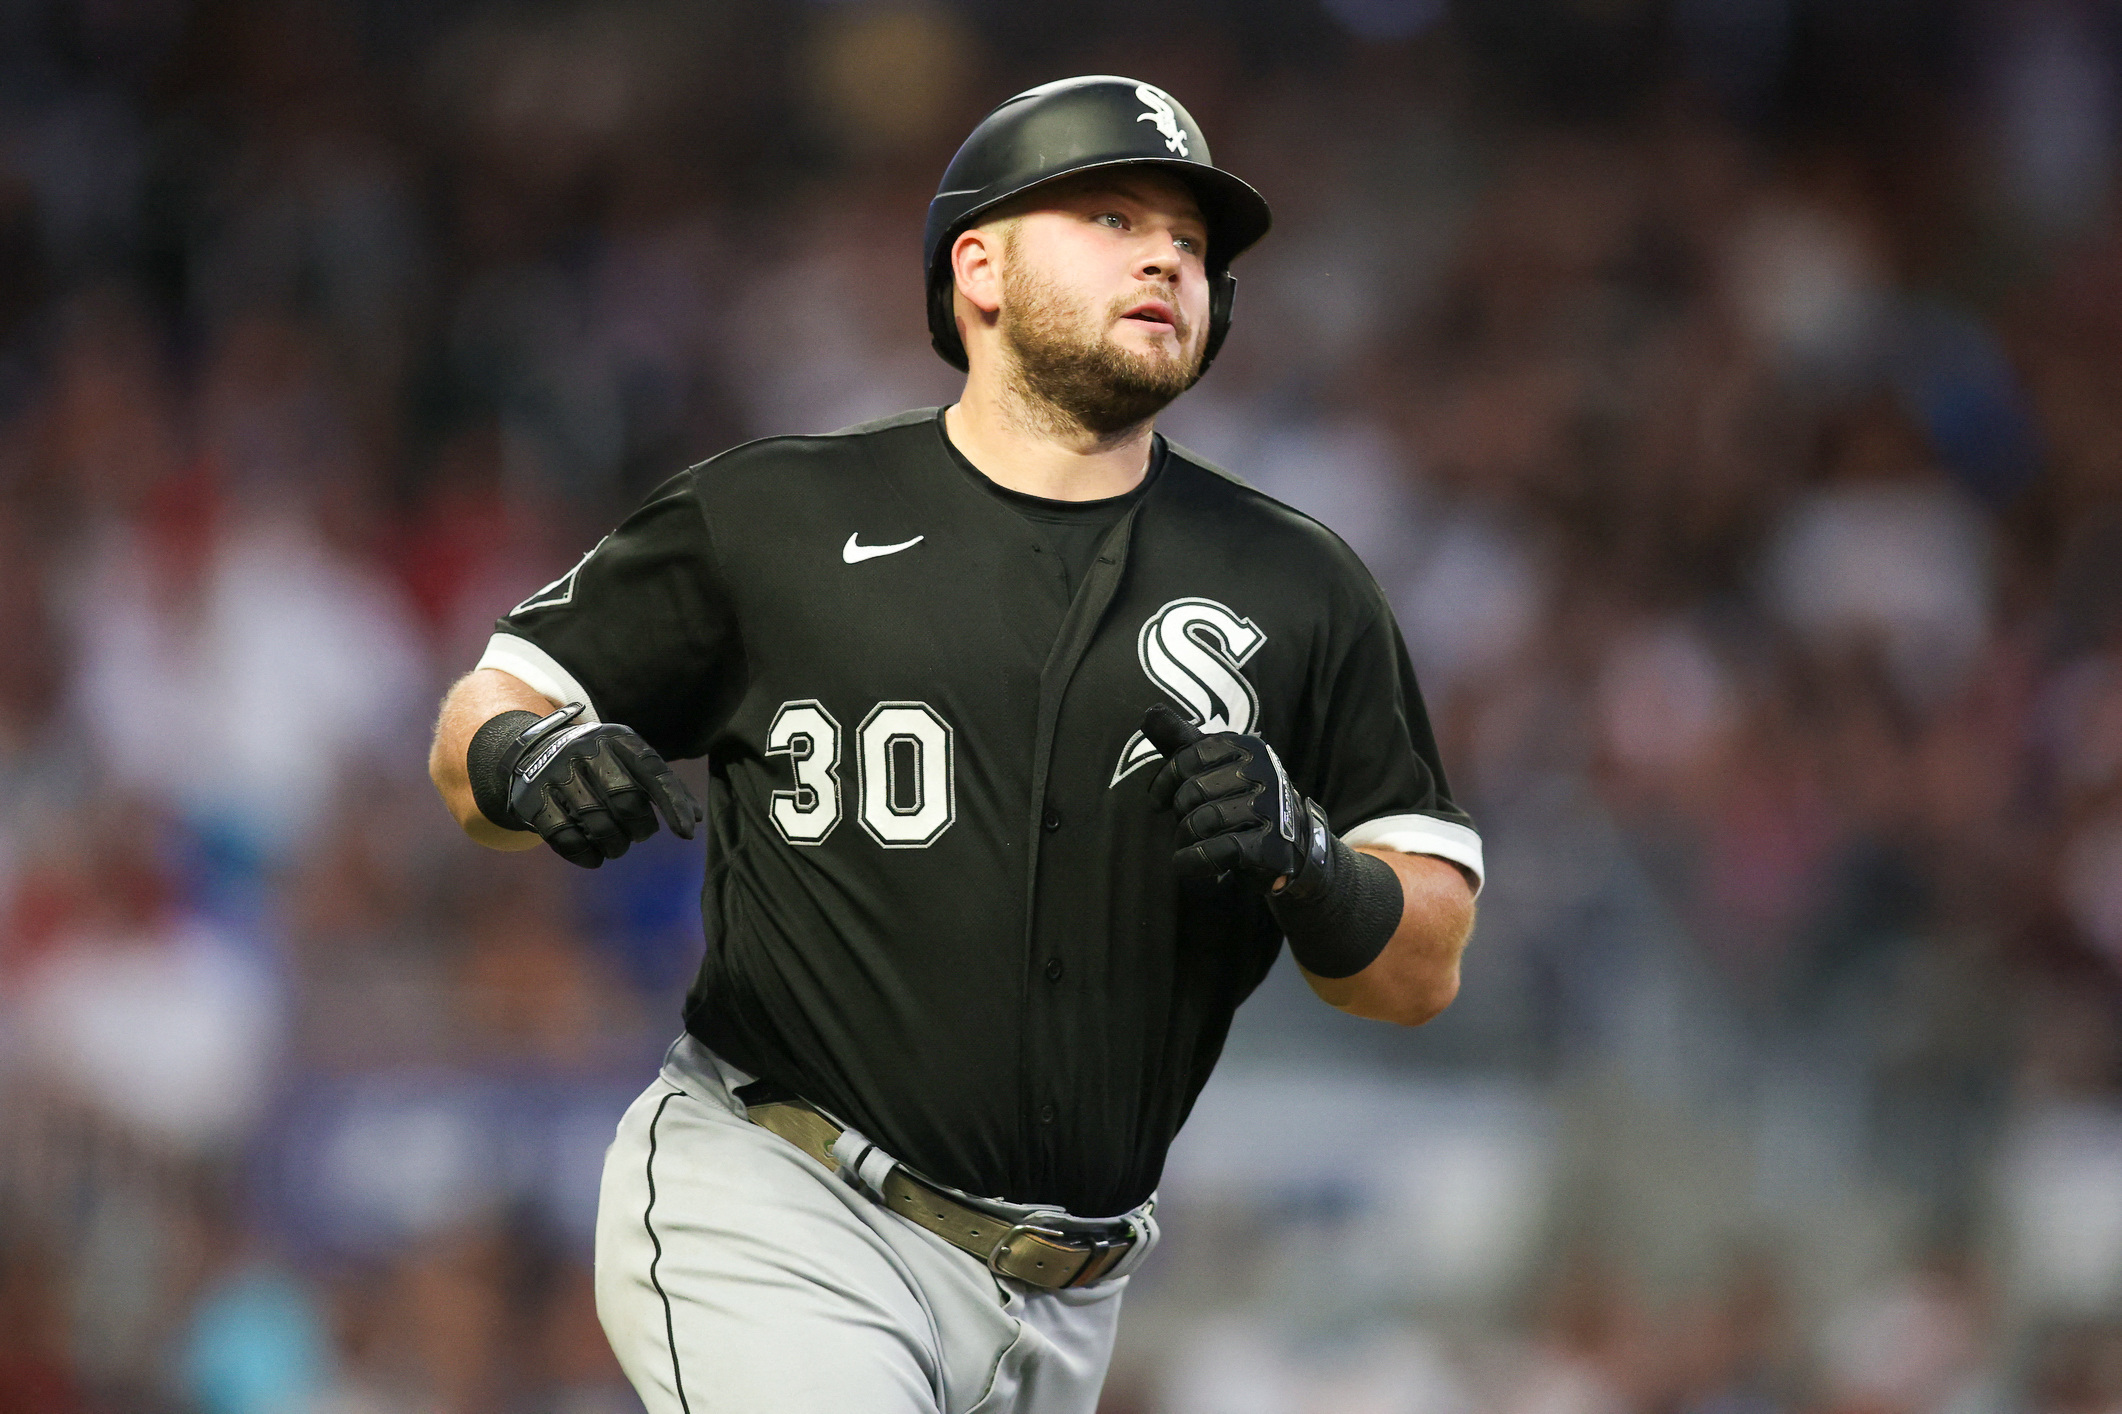 White Sox earn first-ever win in Atlanta, 6-5 | Reuters